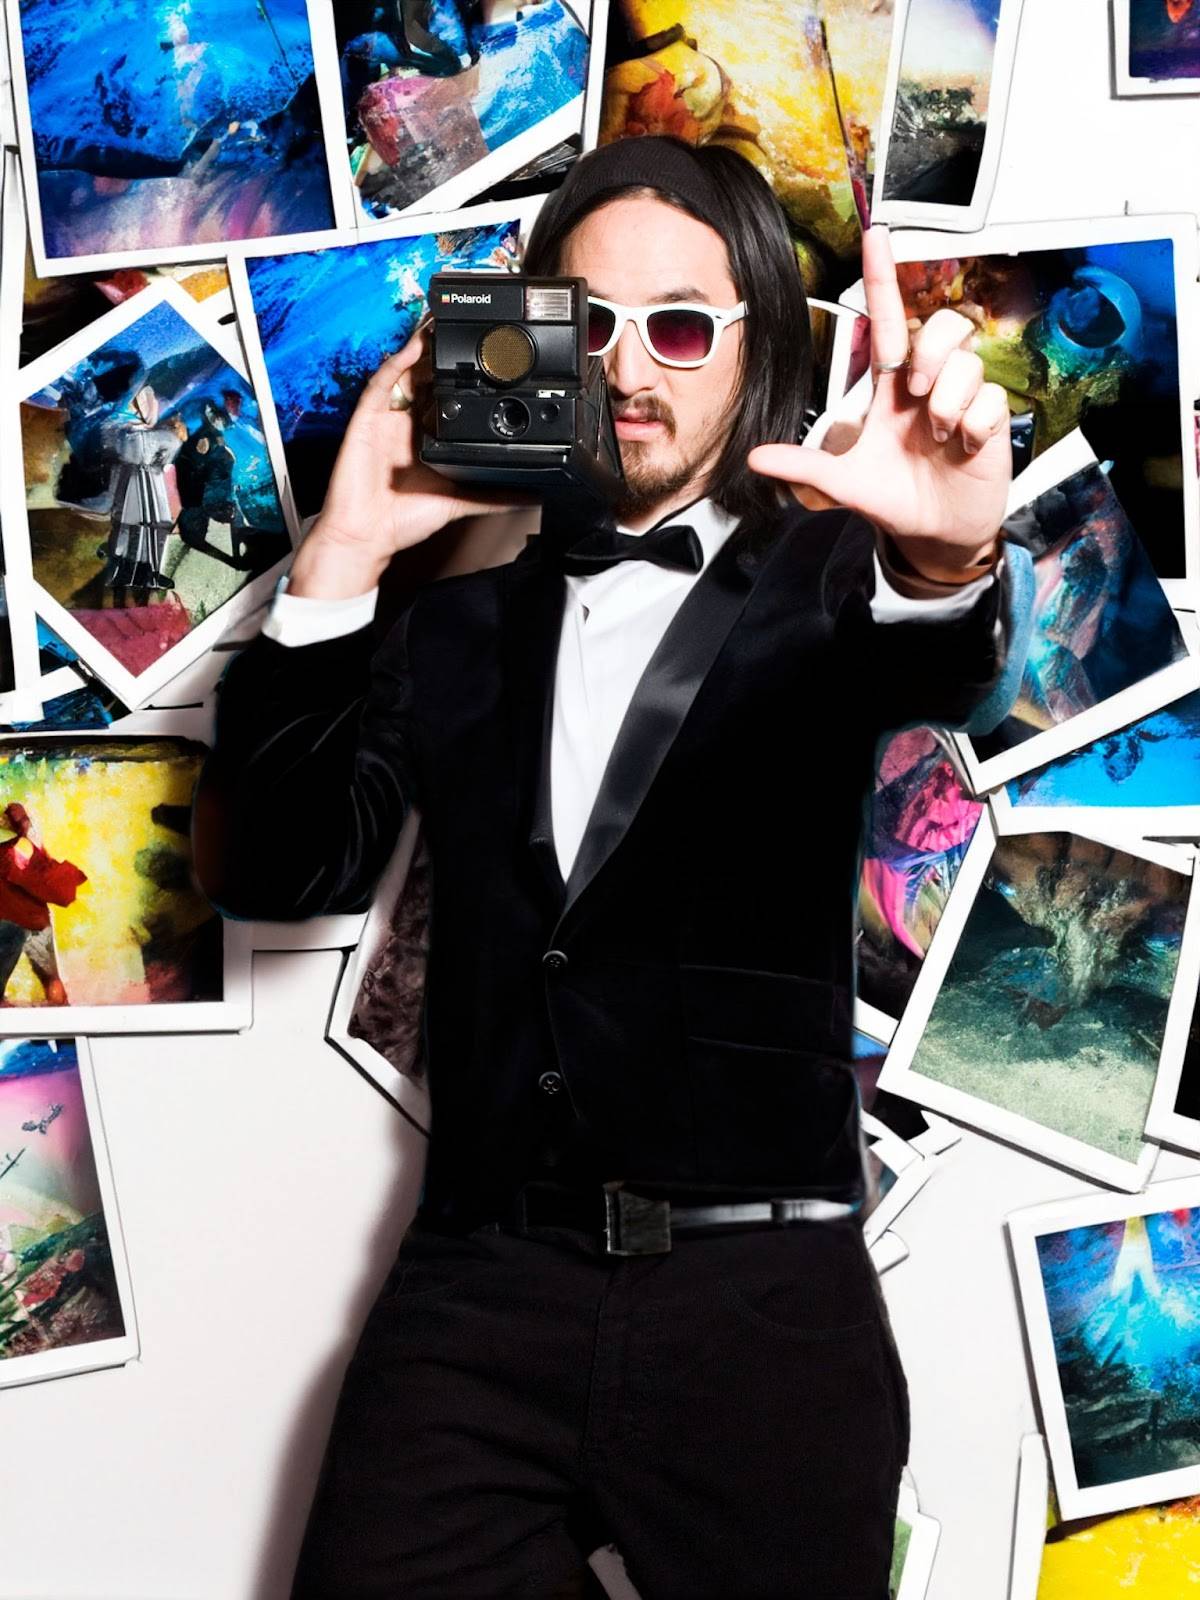 This image of Steve Aoki was taken with the A7IV